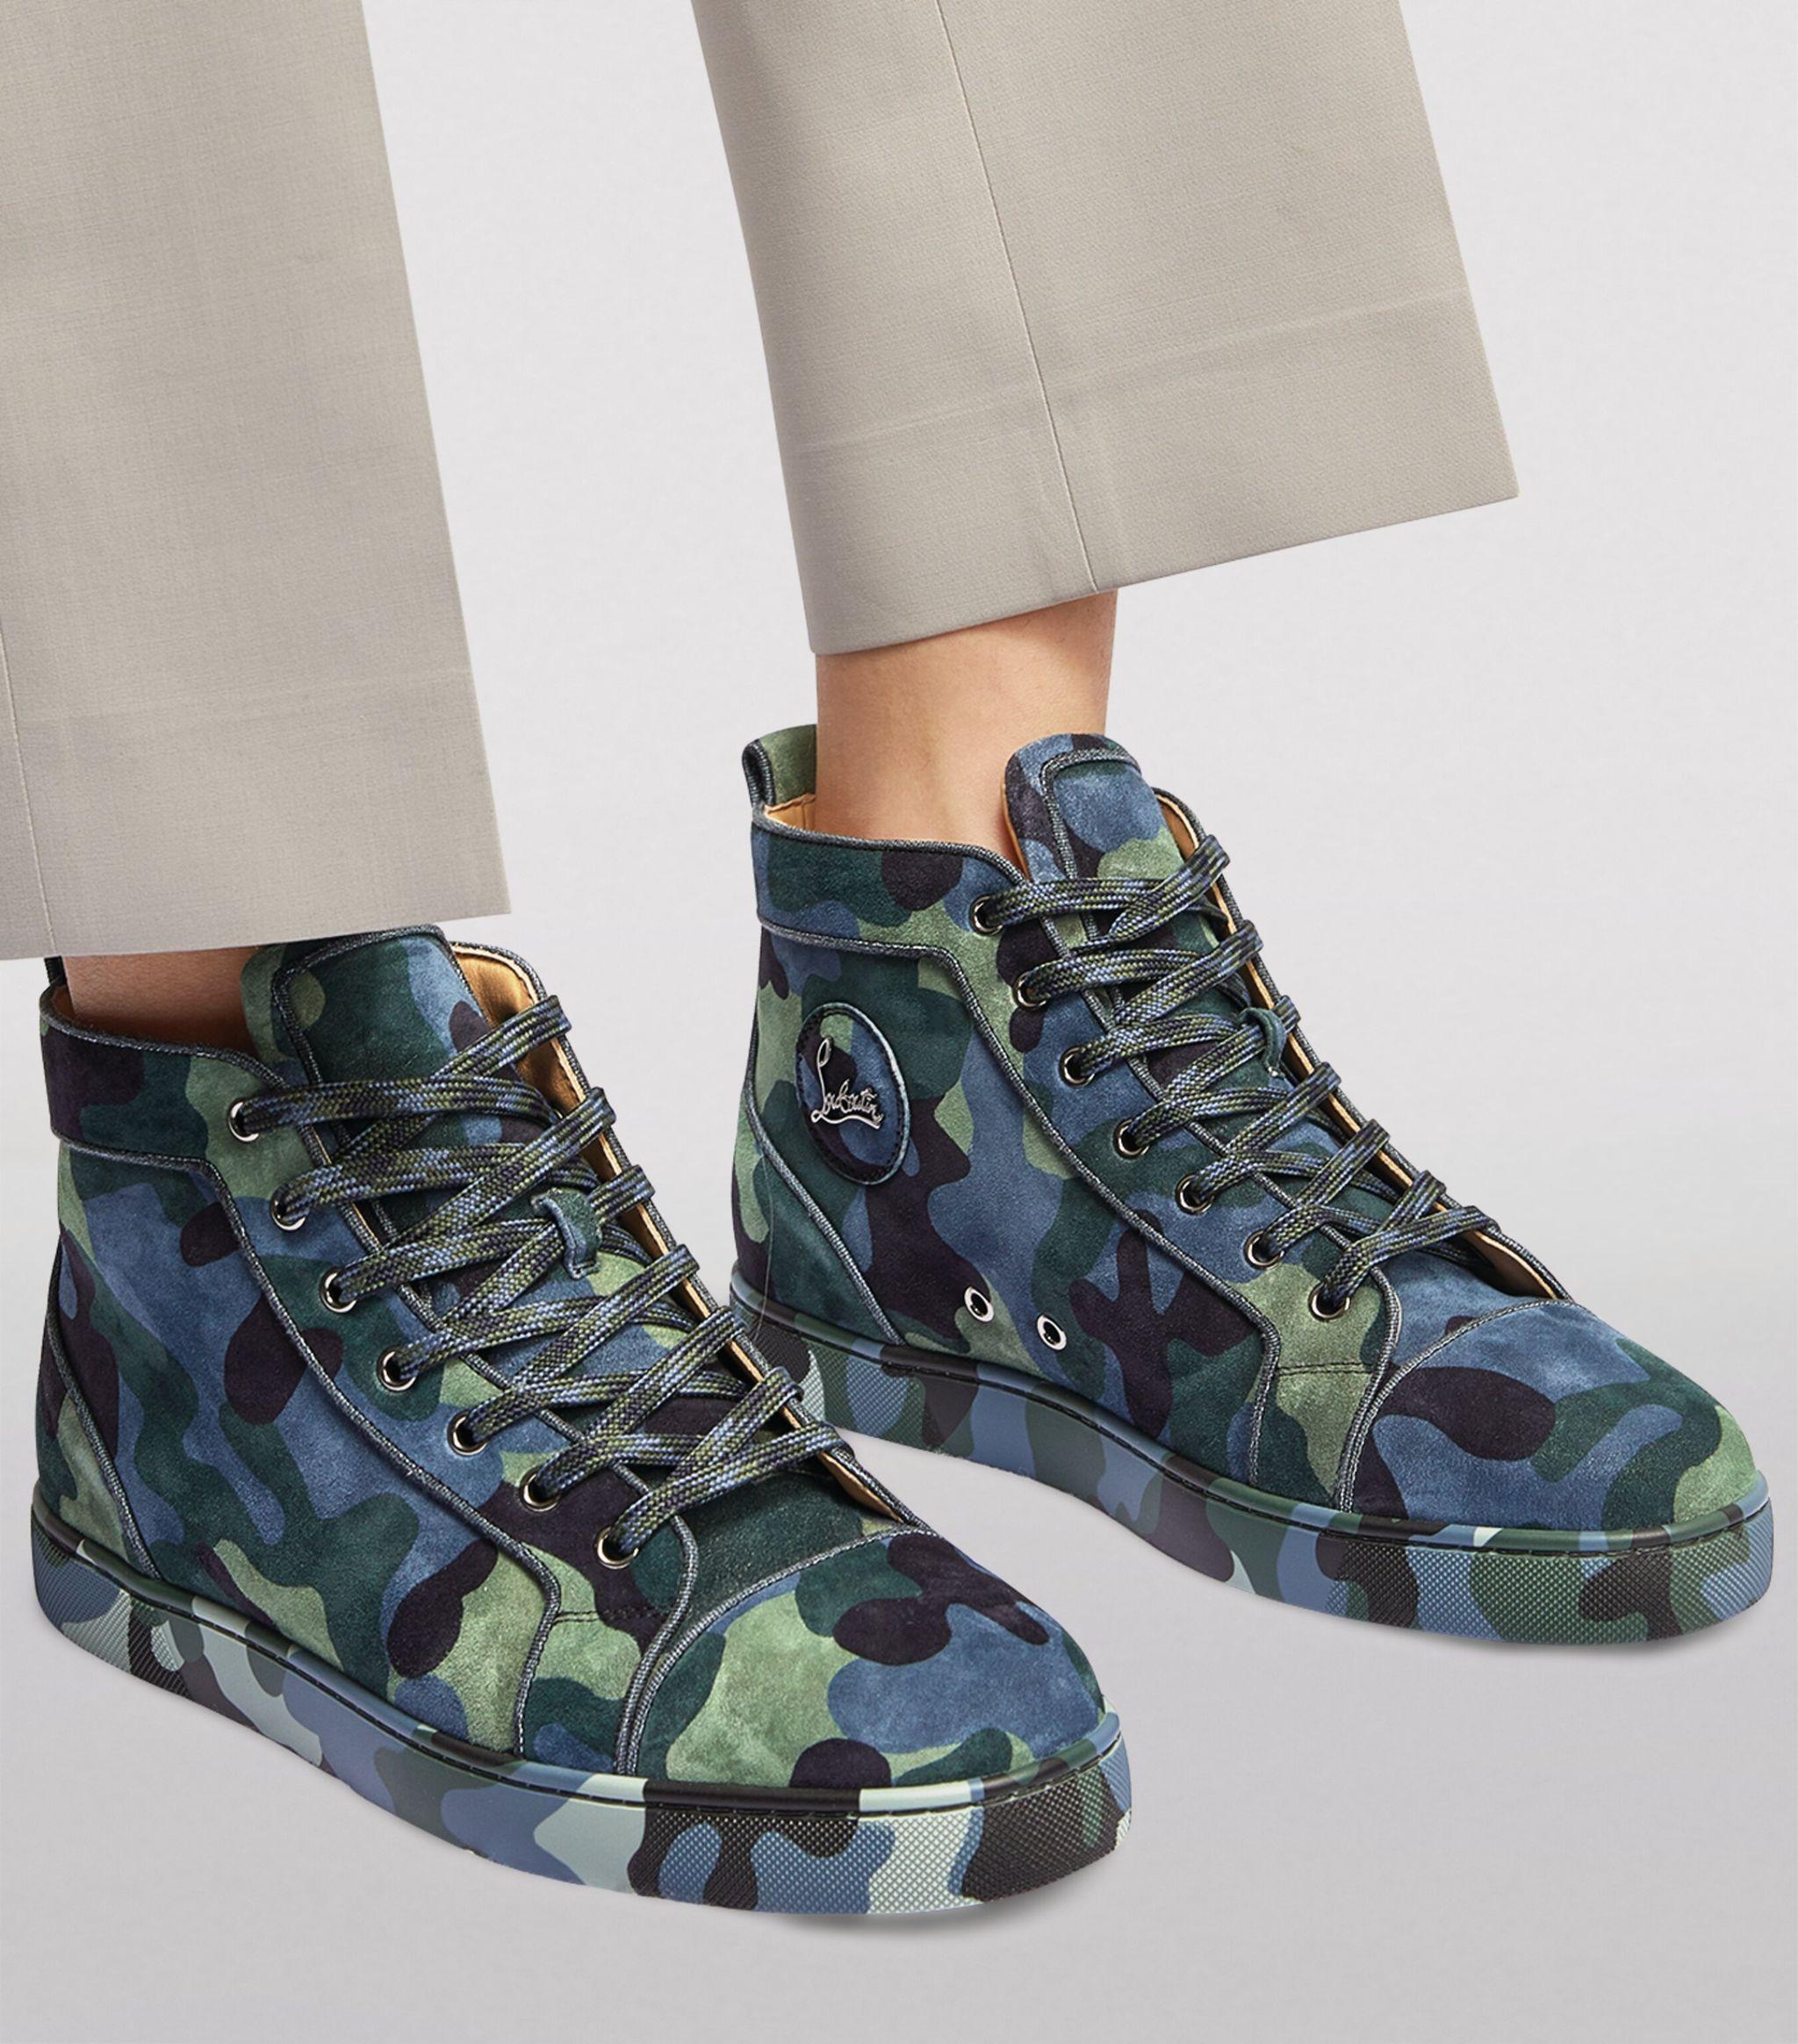 Louis Vuitton Navy Camouflage High-Top Sneakers